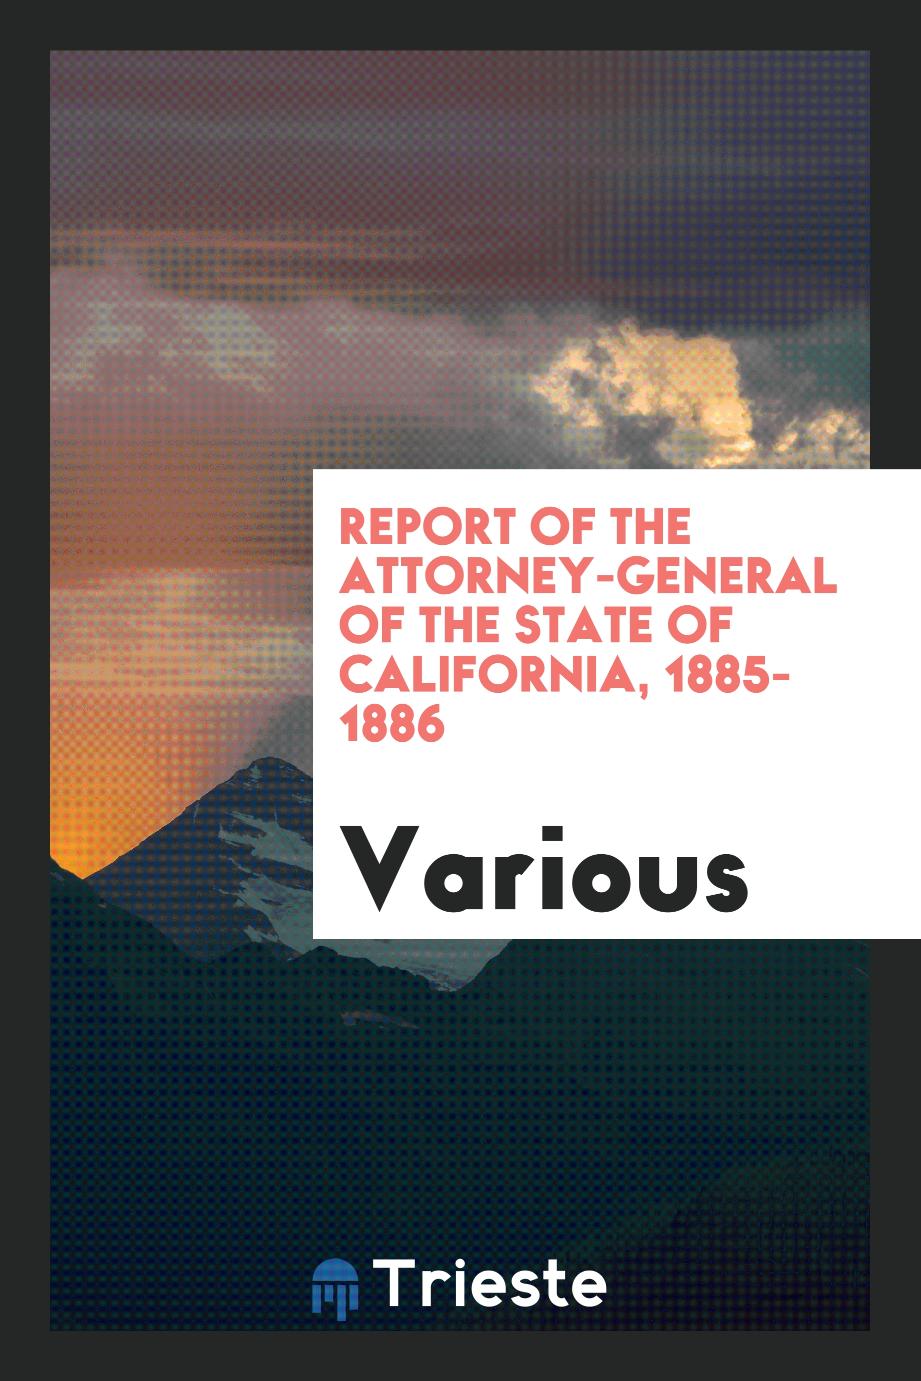 Report of the Attorney-General of the State of California, 1885-1886